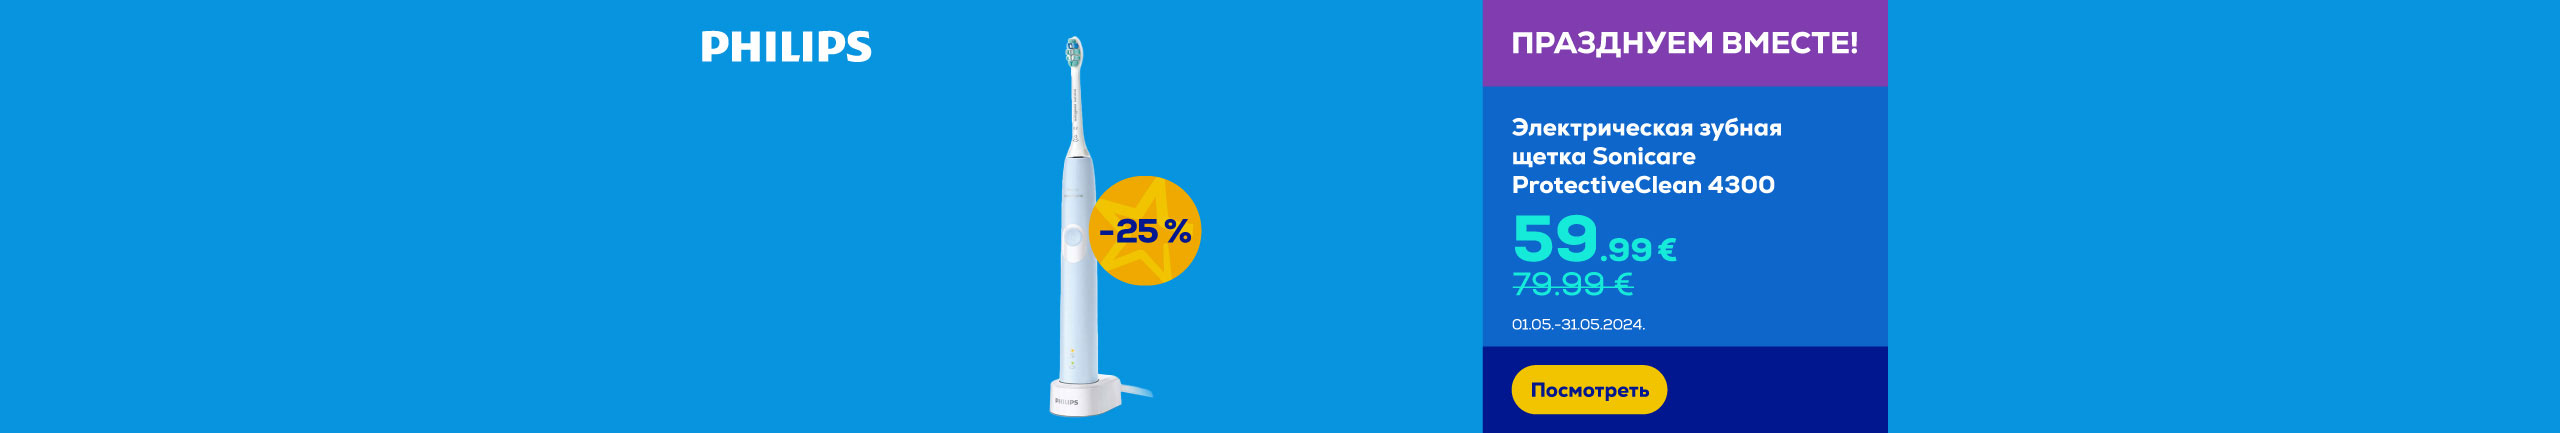 GR sonicare tooth